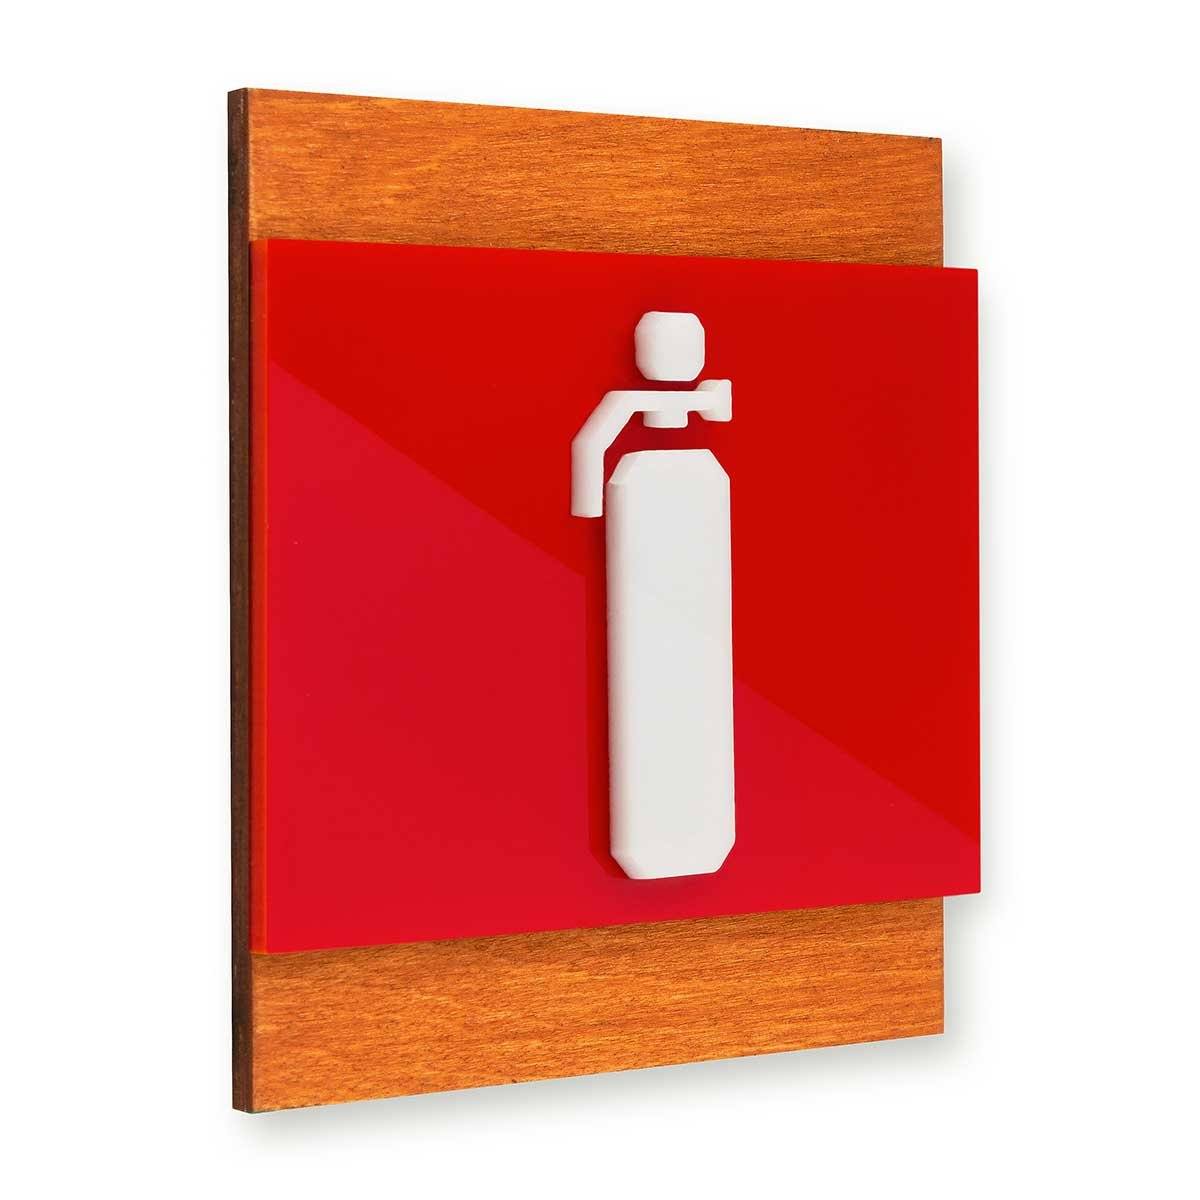 Extinguisher Fire Safety Wooden Wall Sign Information signs Walhunt Bsign